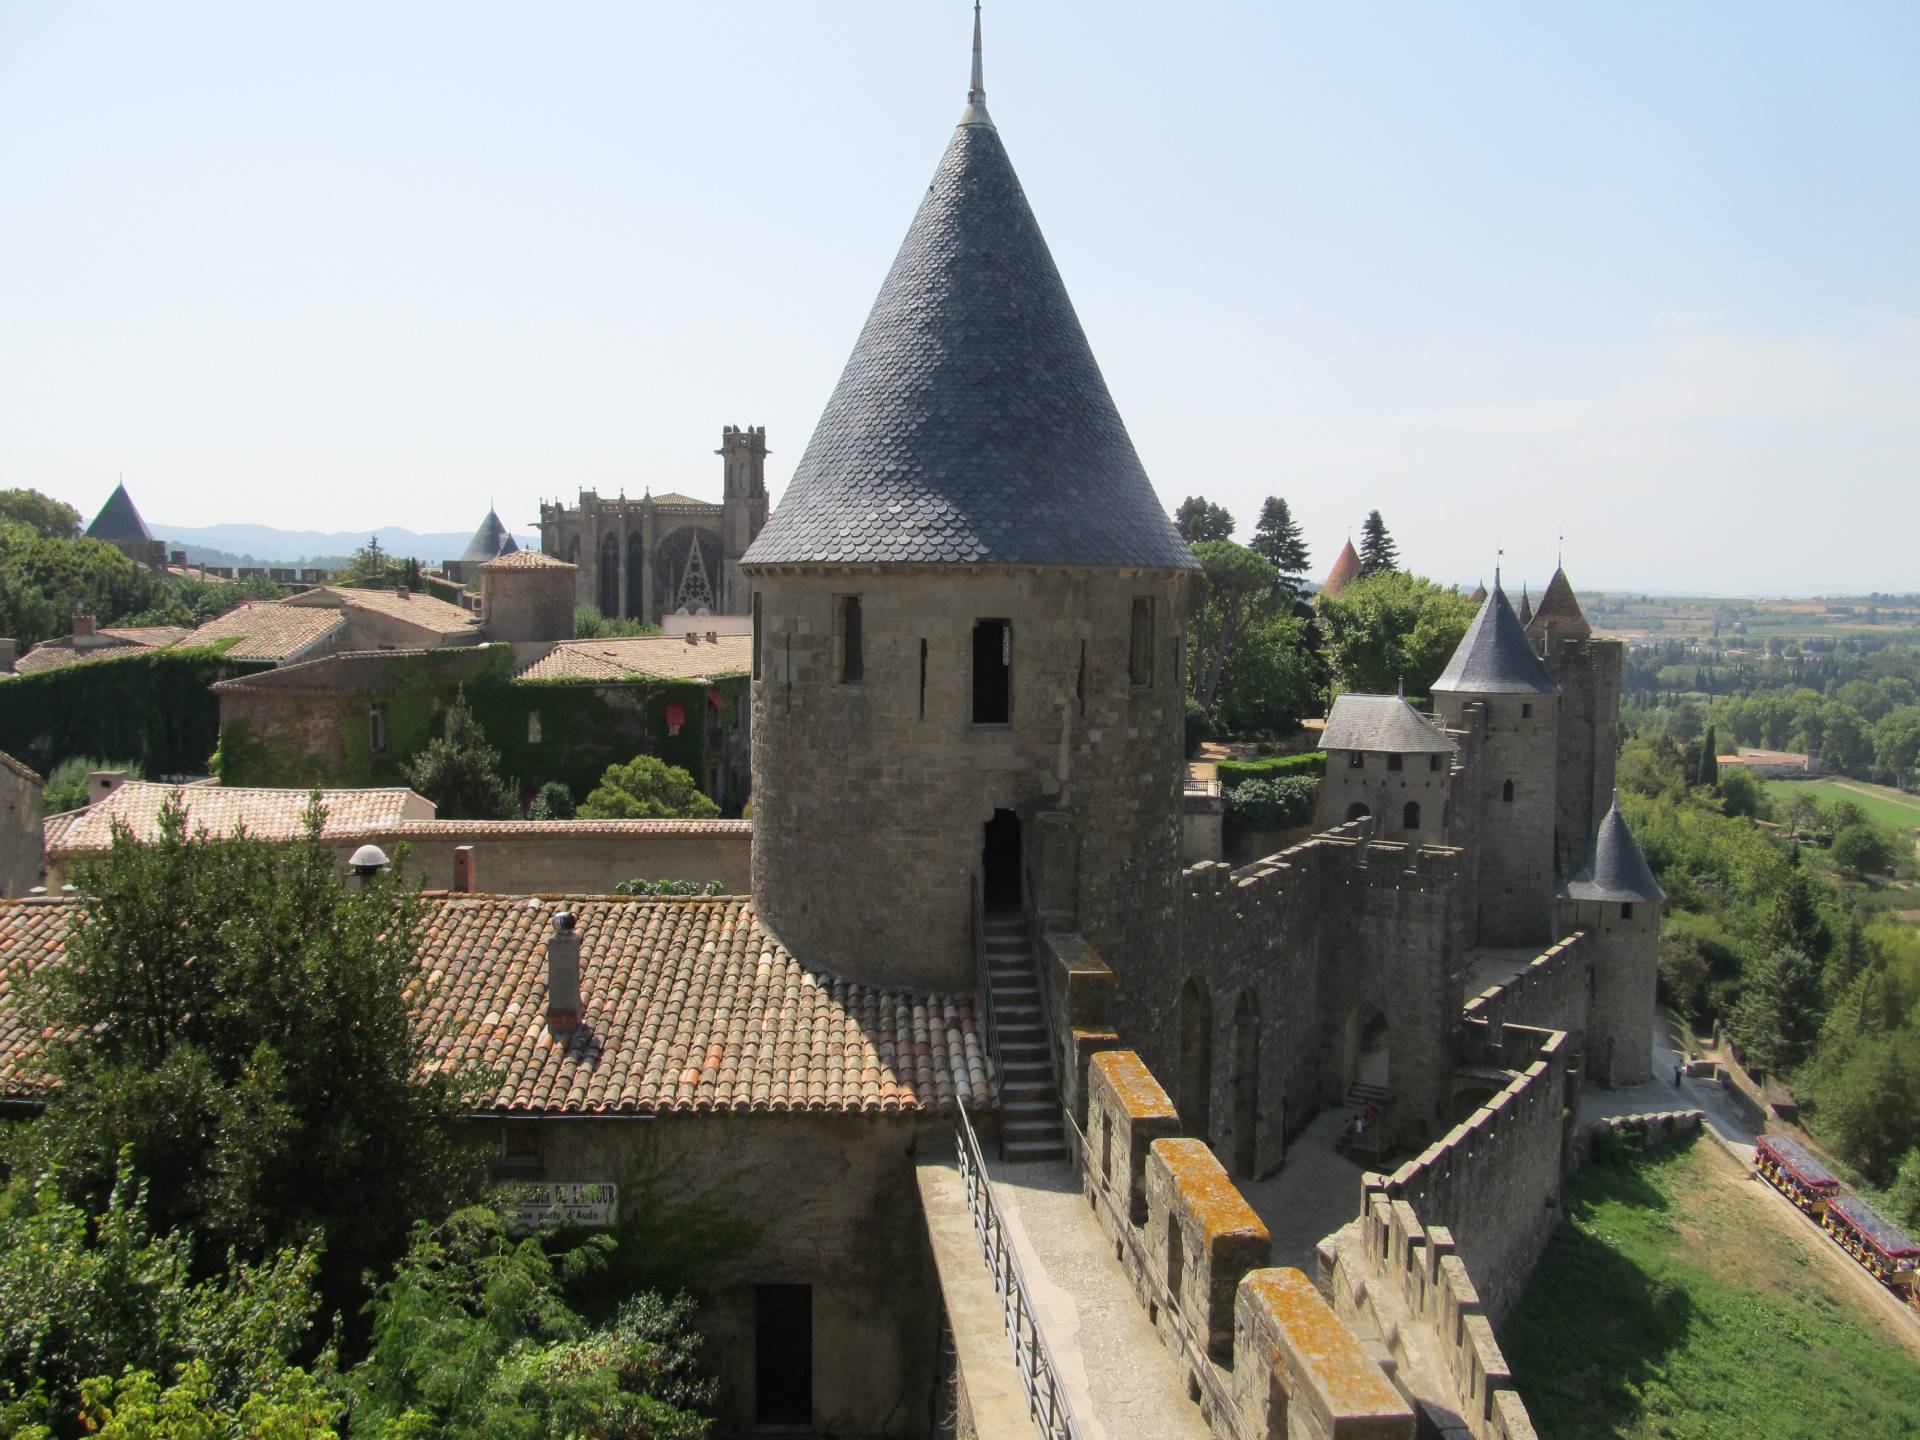 Cité de Carcassonne, a medieval citadel in French with a lot of history